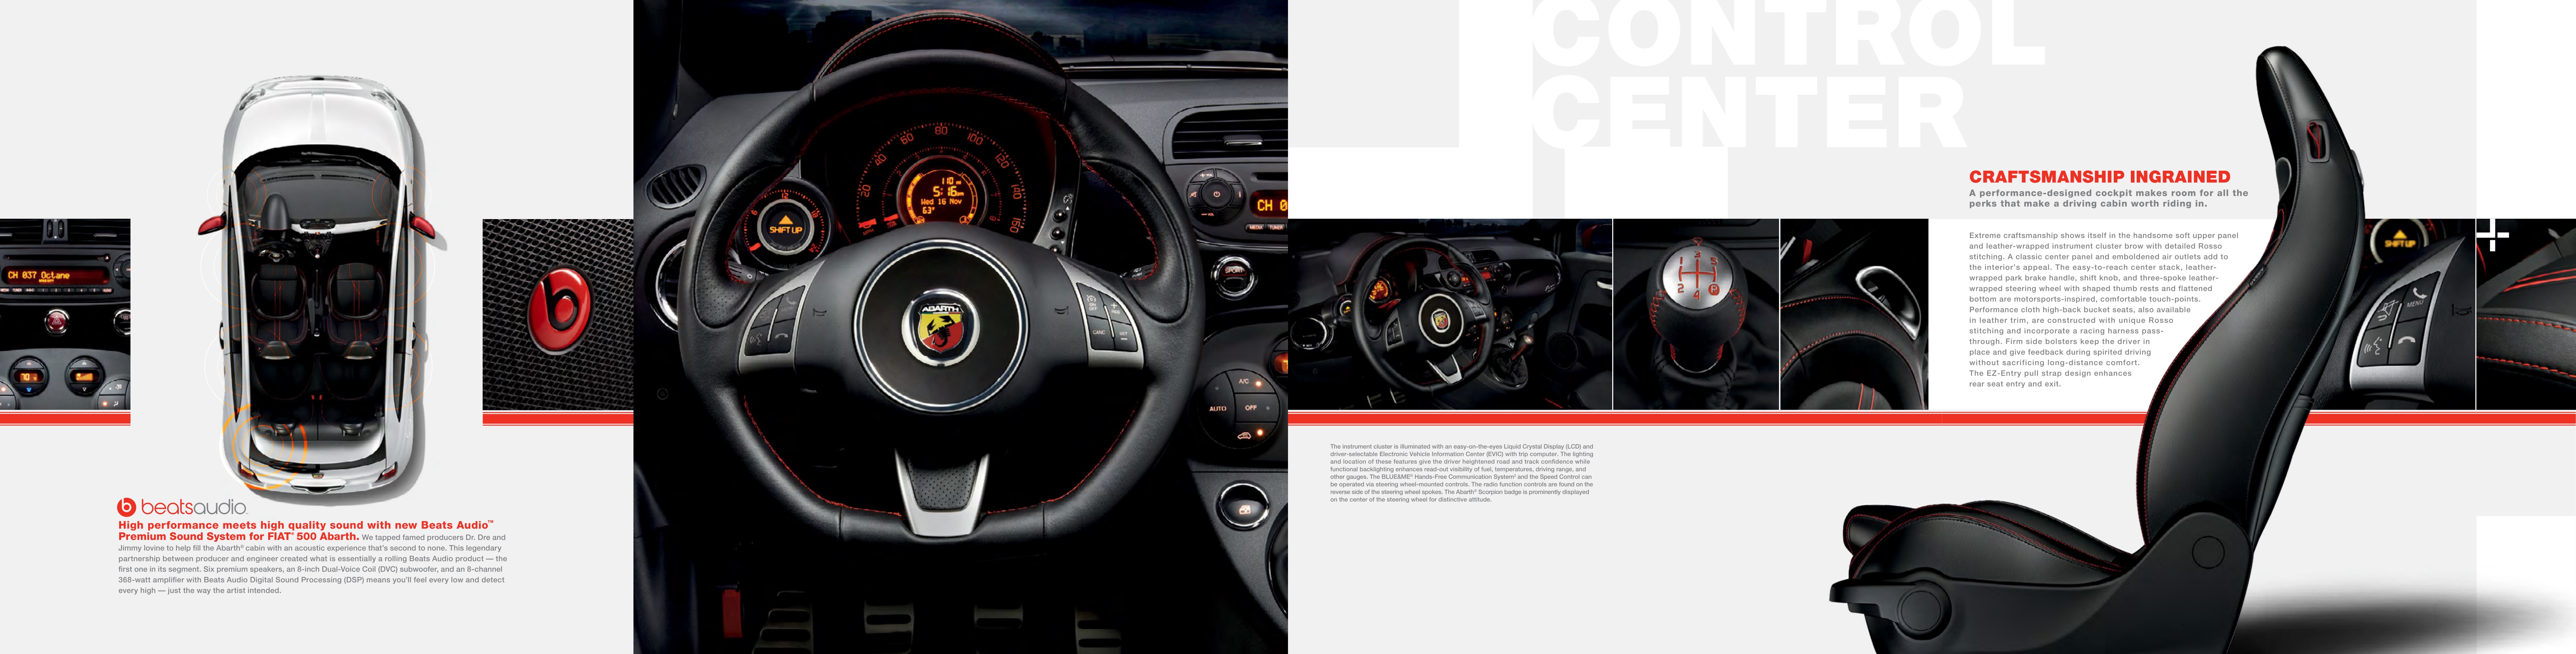 2014 Fiat 500 Abarth Brochure Page 13